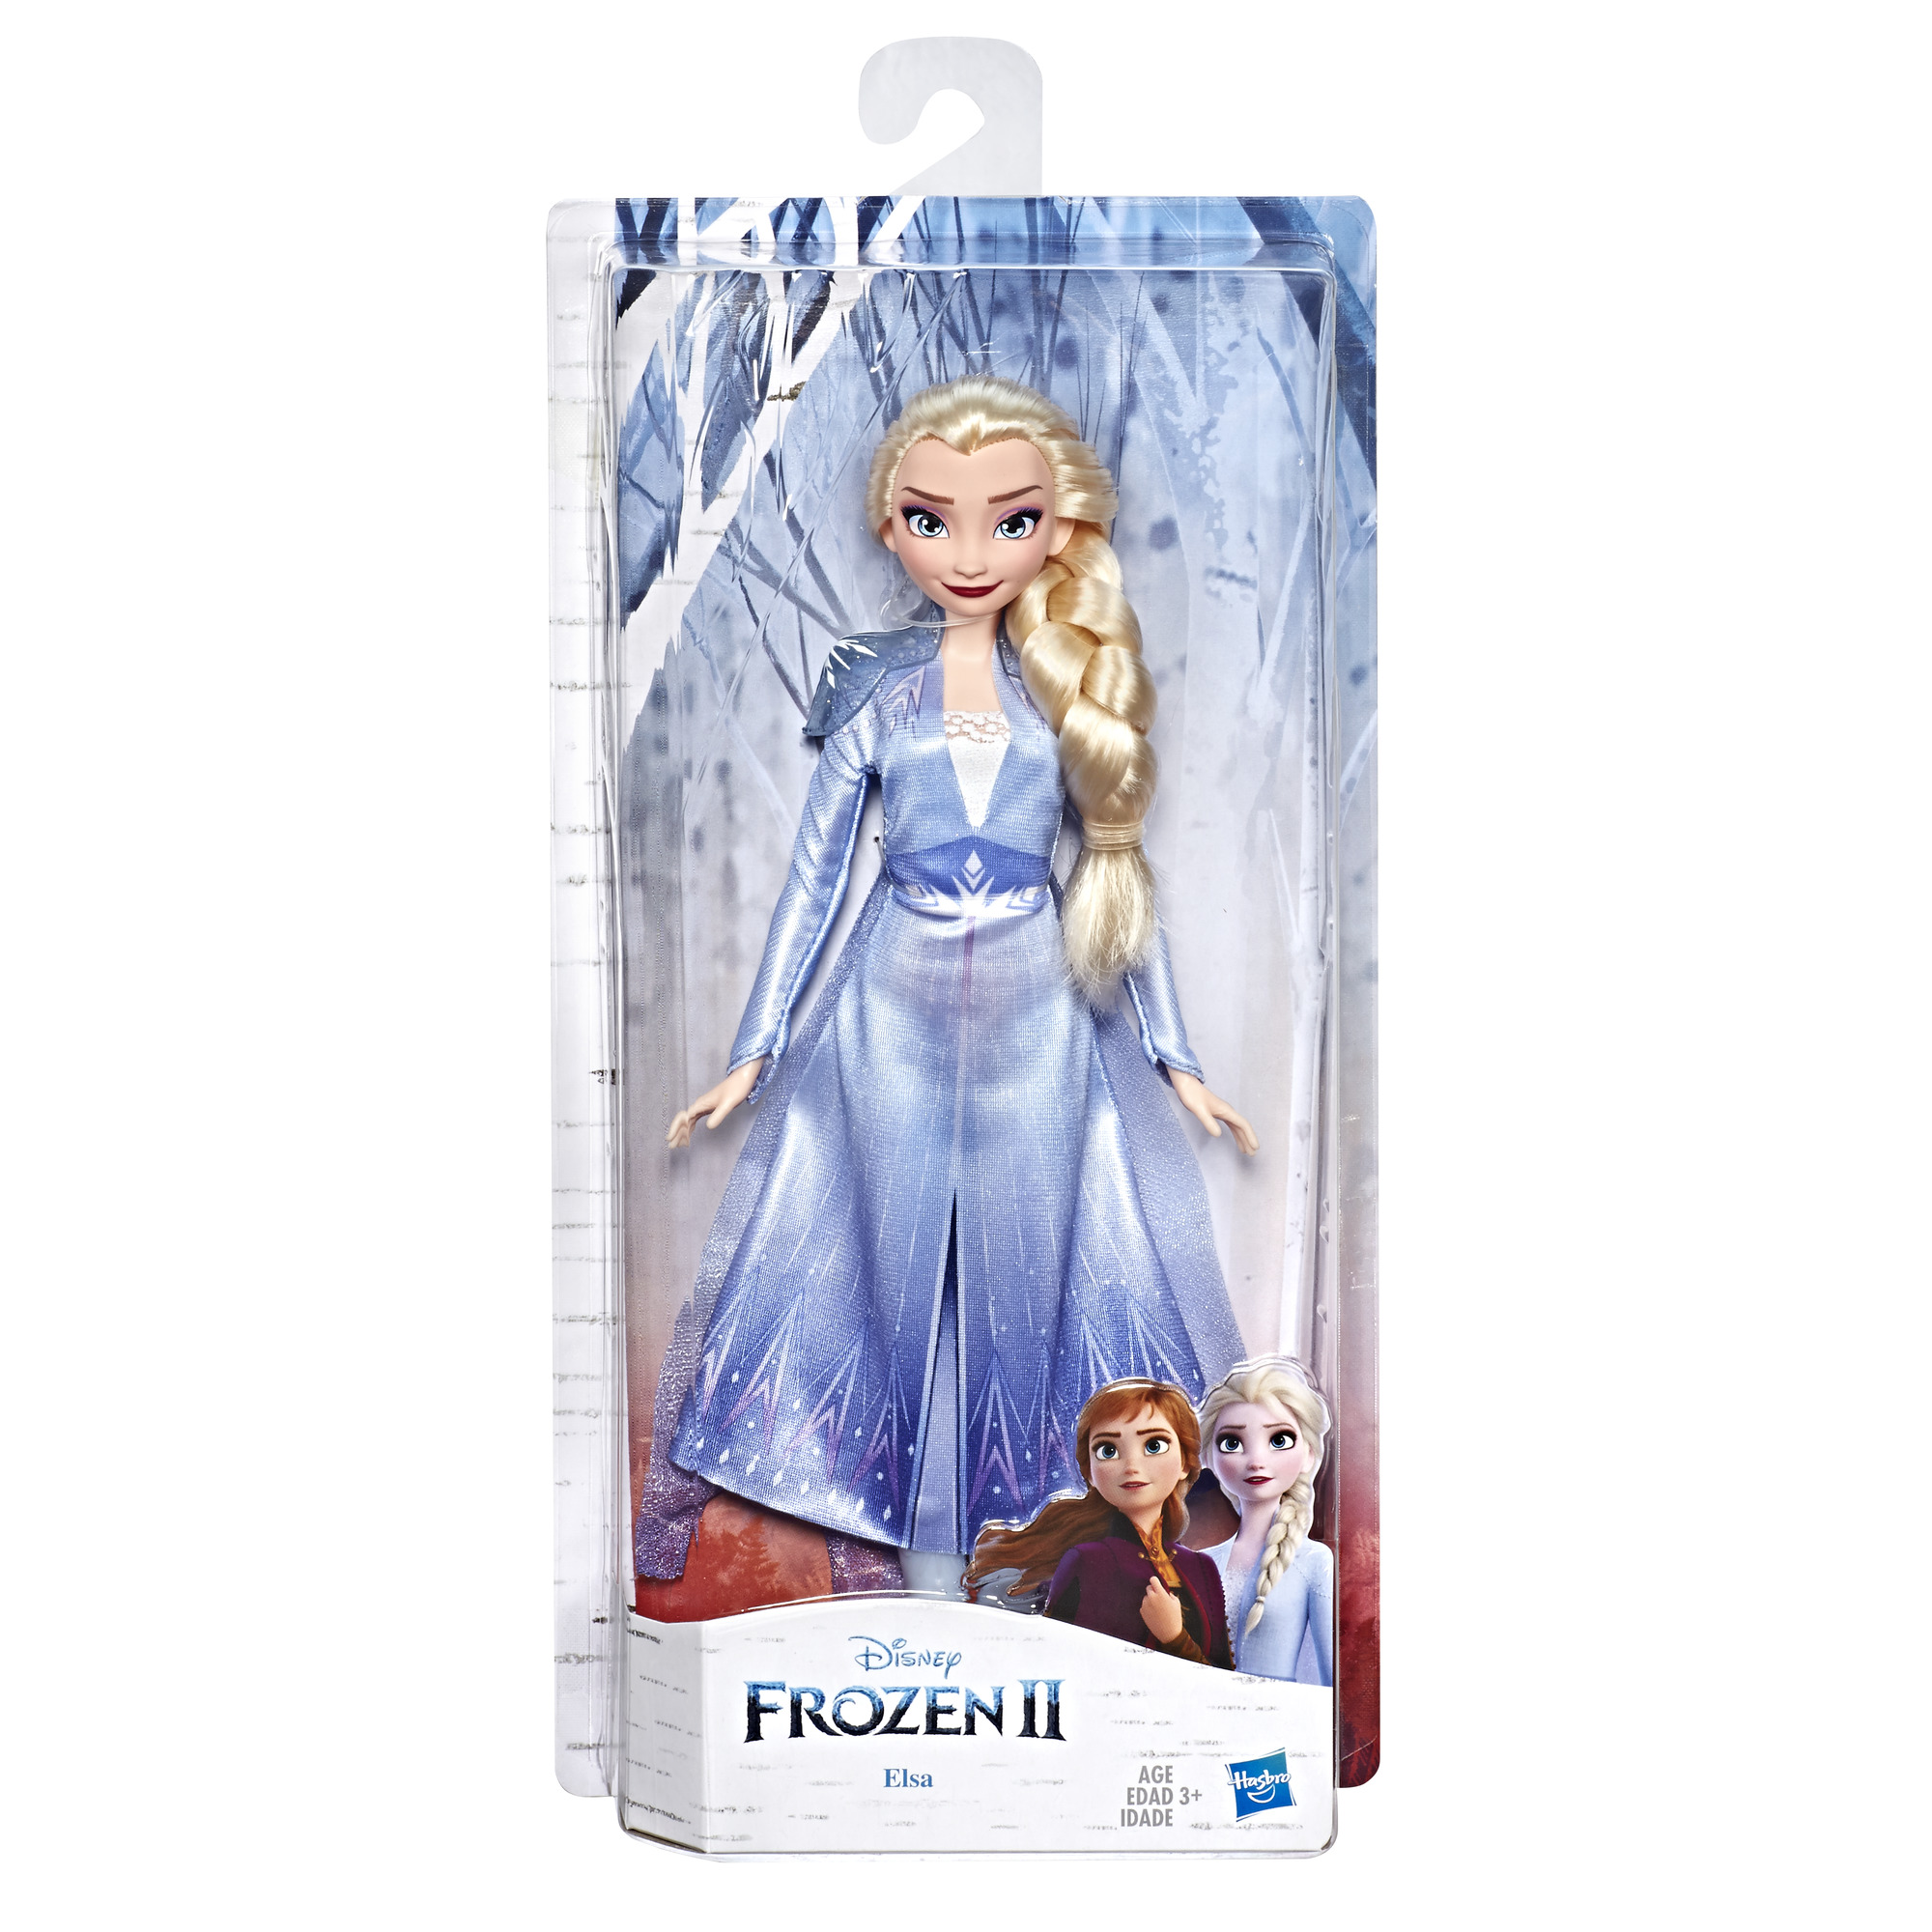 Disney Frozen Elsa Fashion Doll With Long Blonde Hair and Blue Outfit Inspired by Frozen 2 - image 2 of 3